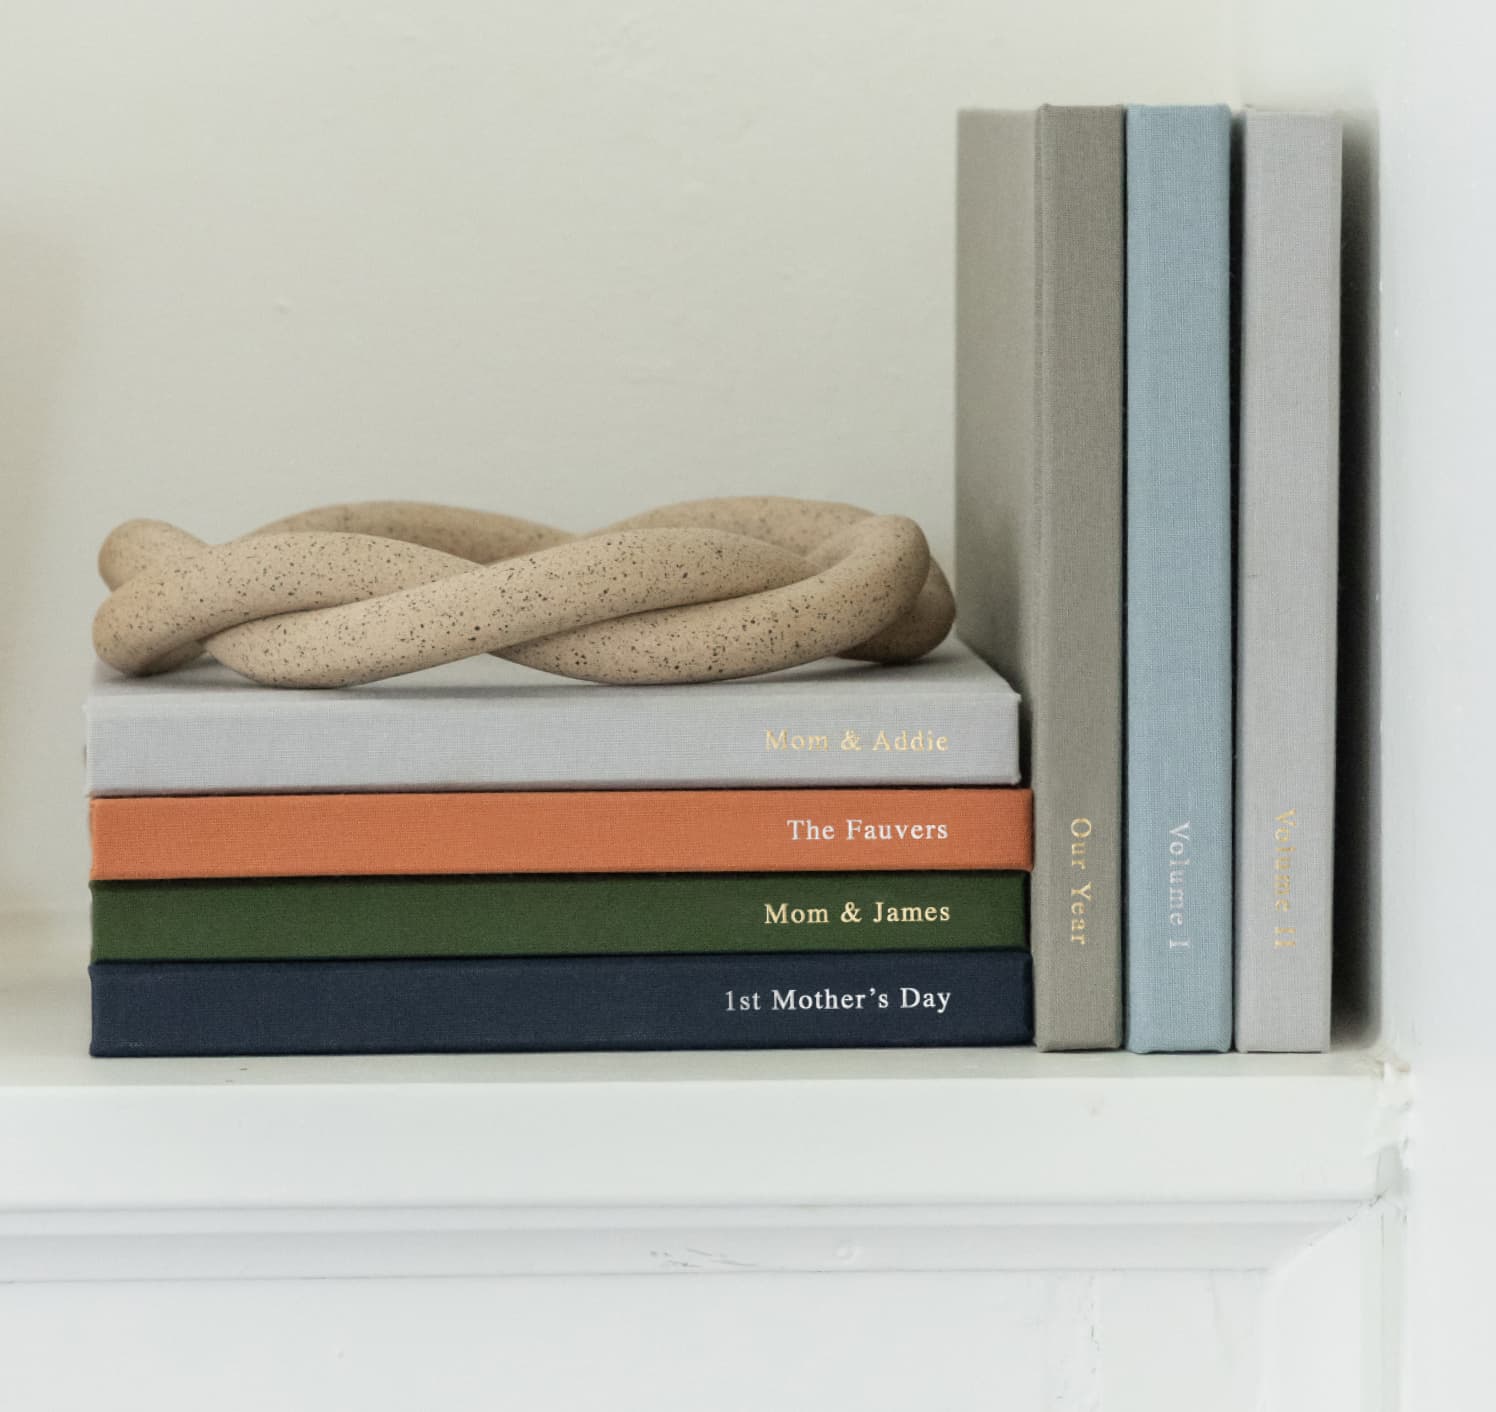 Everyday Photo Books stack in shelf on display